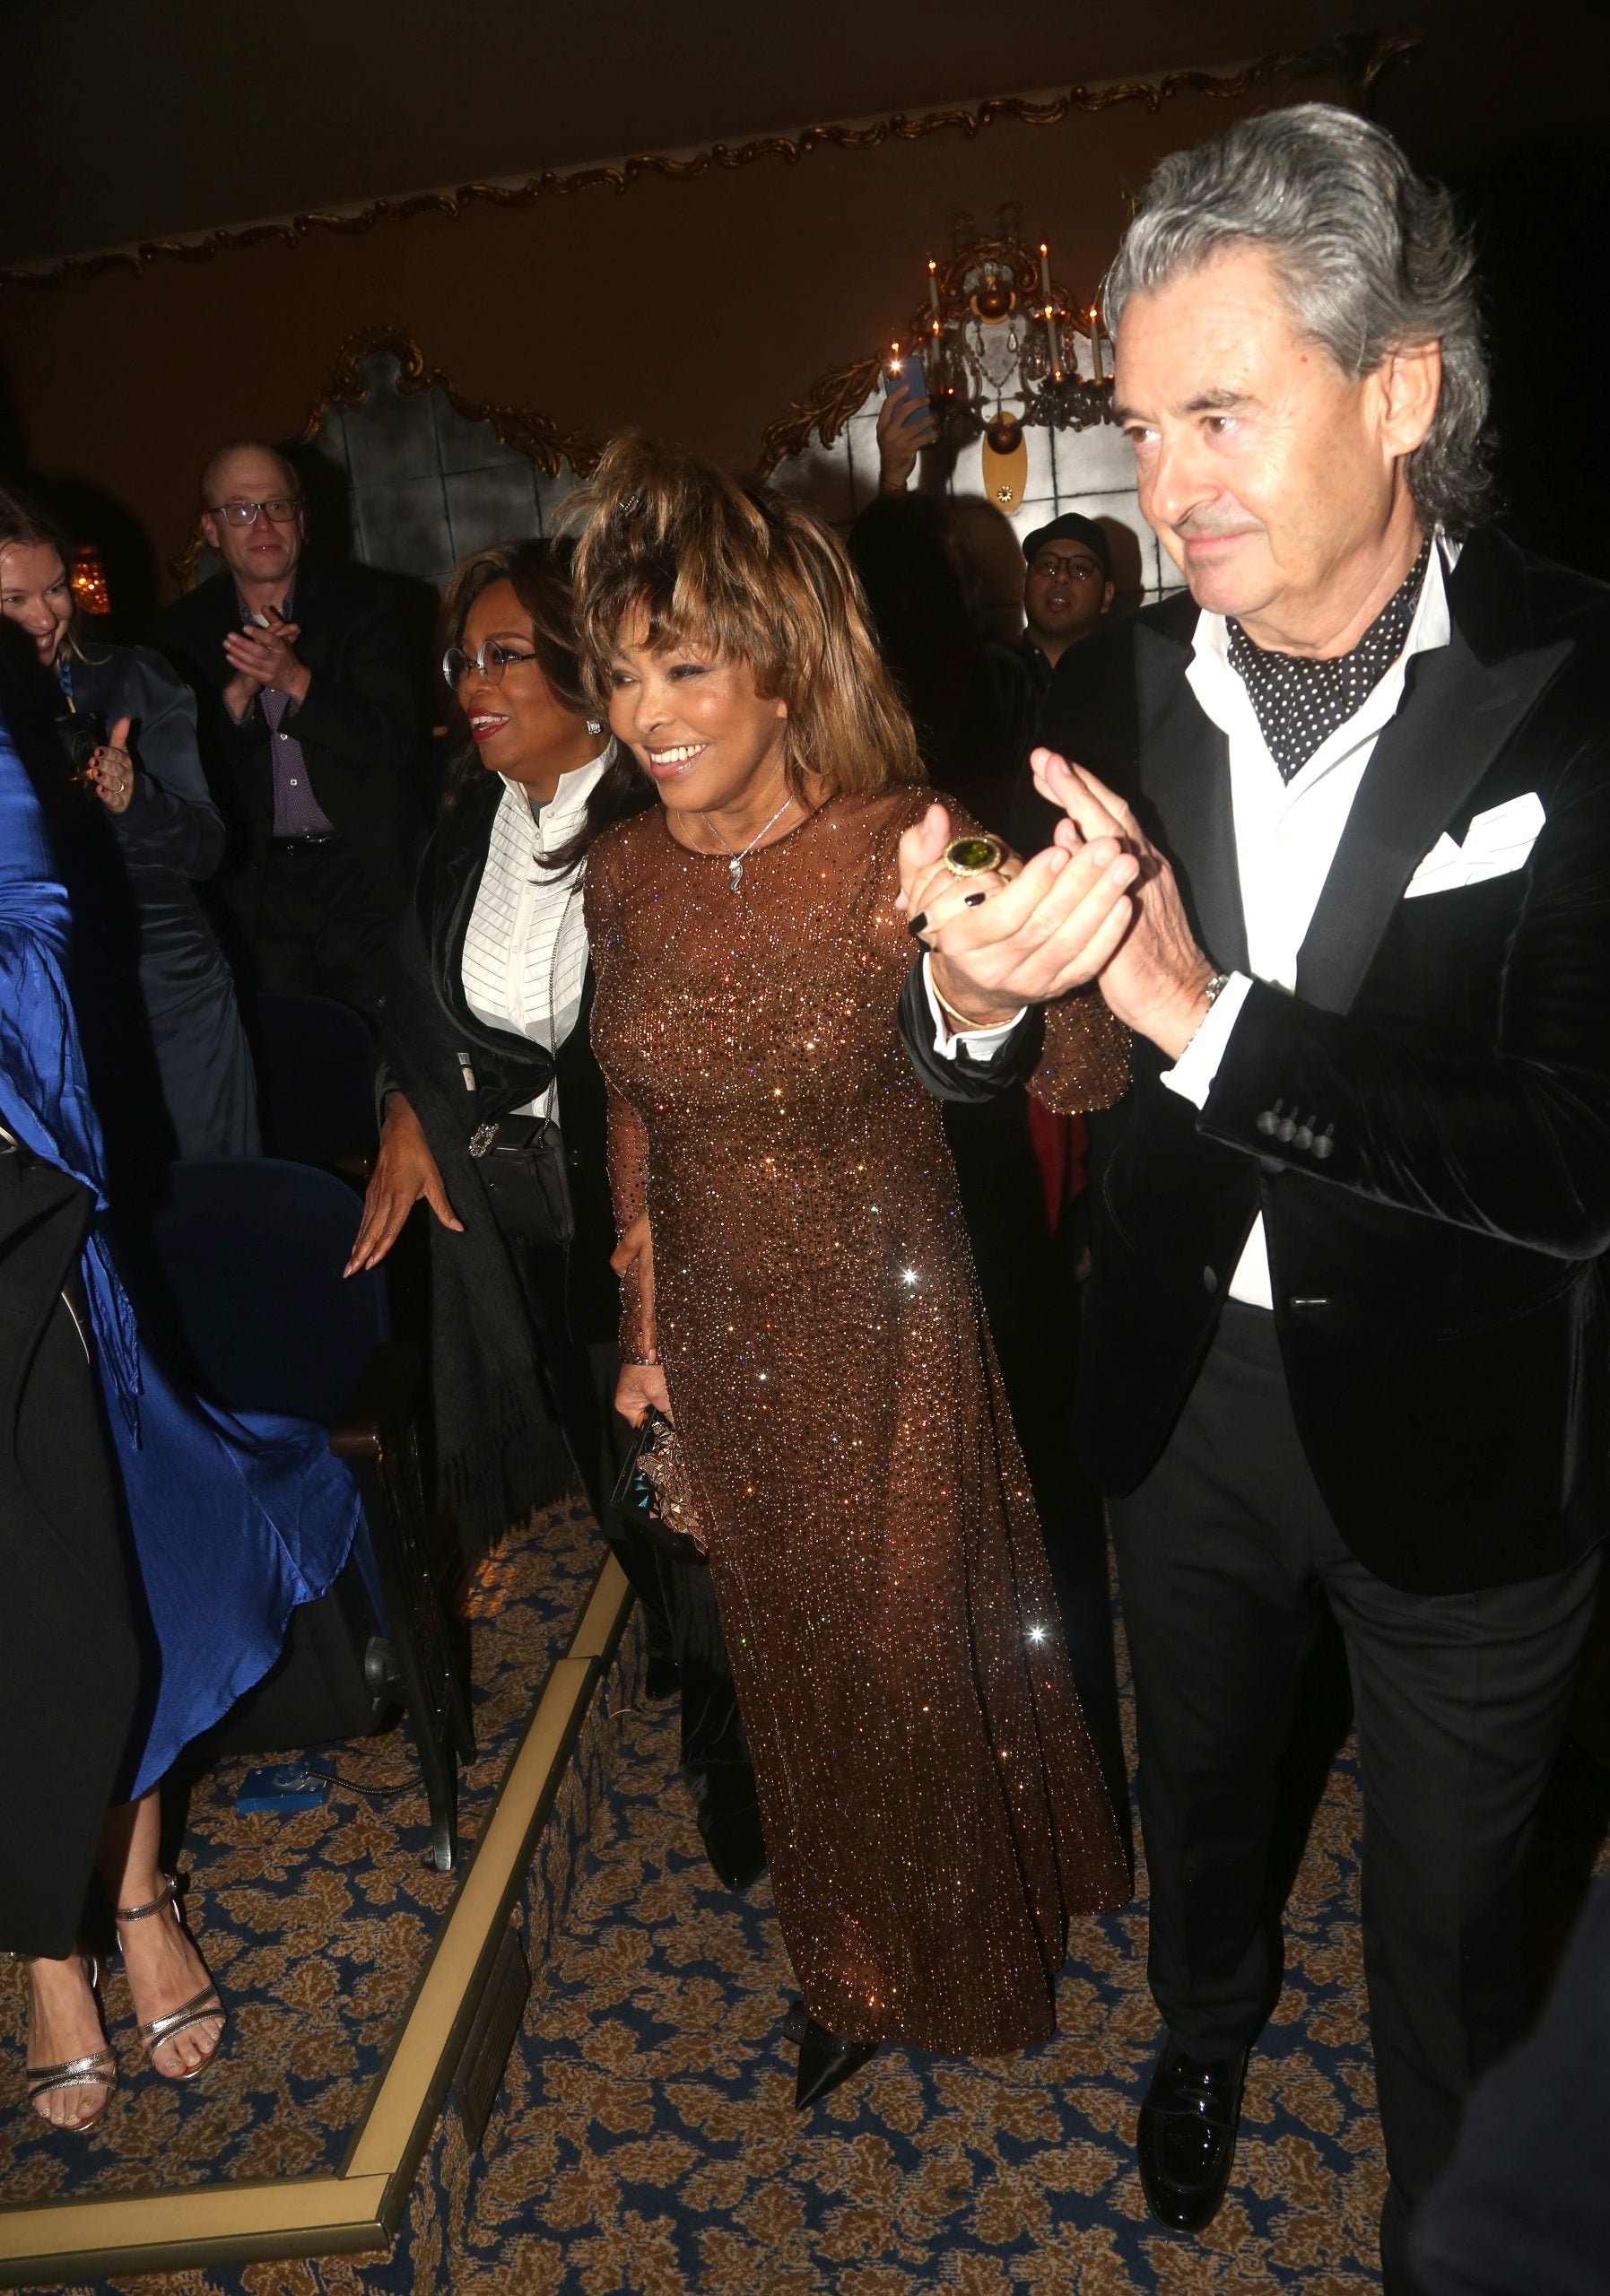 'We Are The Light Of Each Other's Lives': Photos Of Tina Turner And Husband Erwin Bach Over The Years